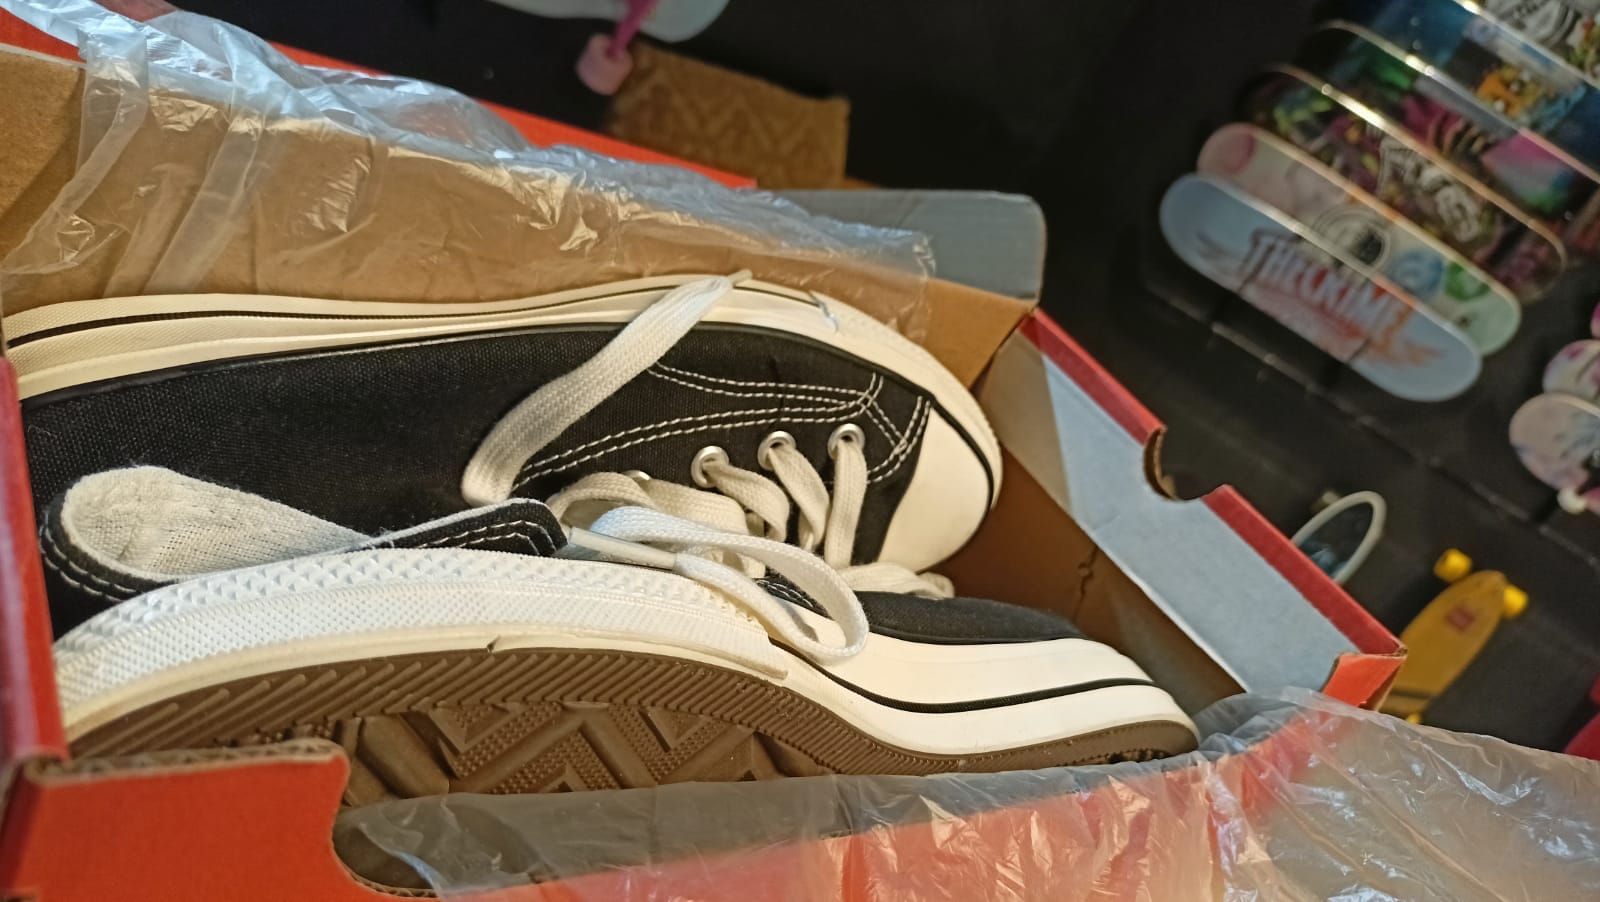 Shoe unboxing of the Converse Chuck Taylor All Star Canvas Low Top Sneaker